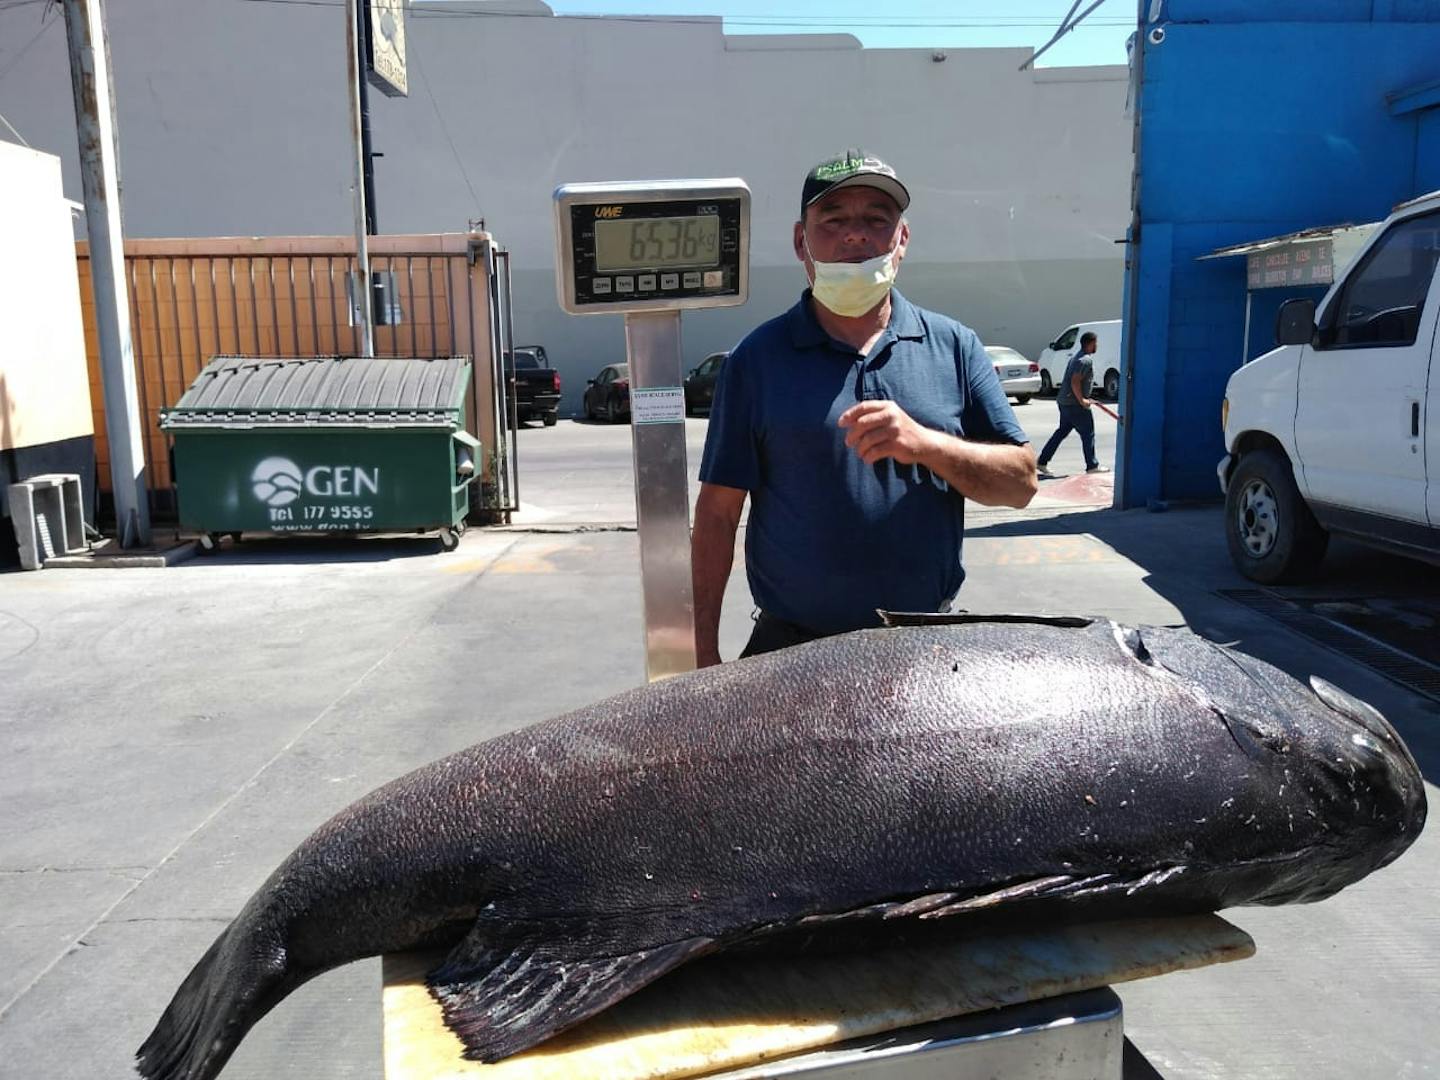 A man standing behind a very large black fish on a scale.